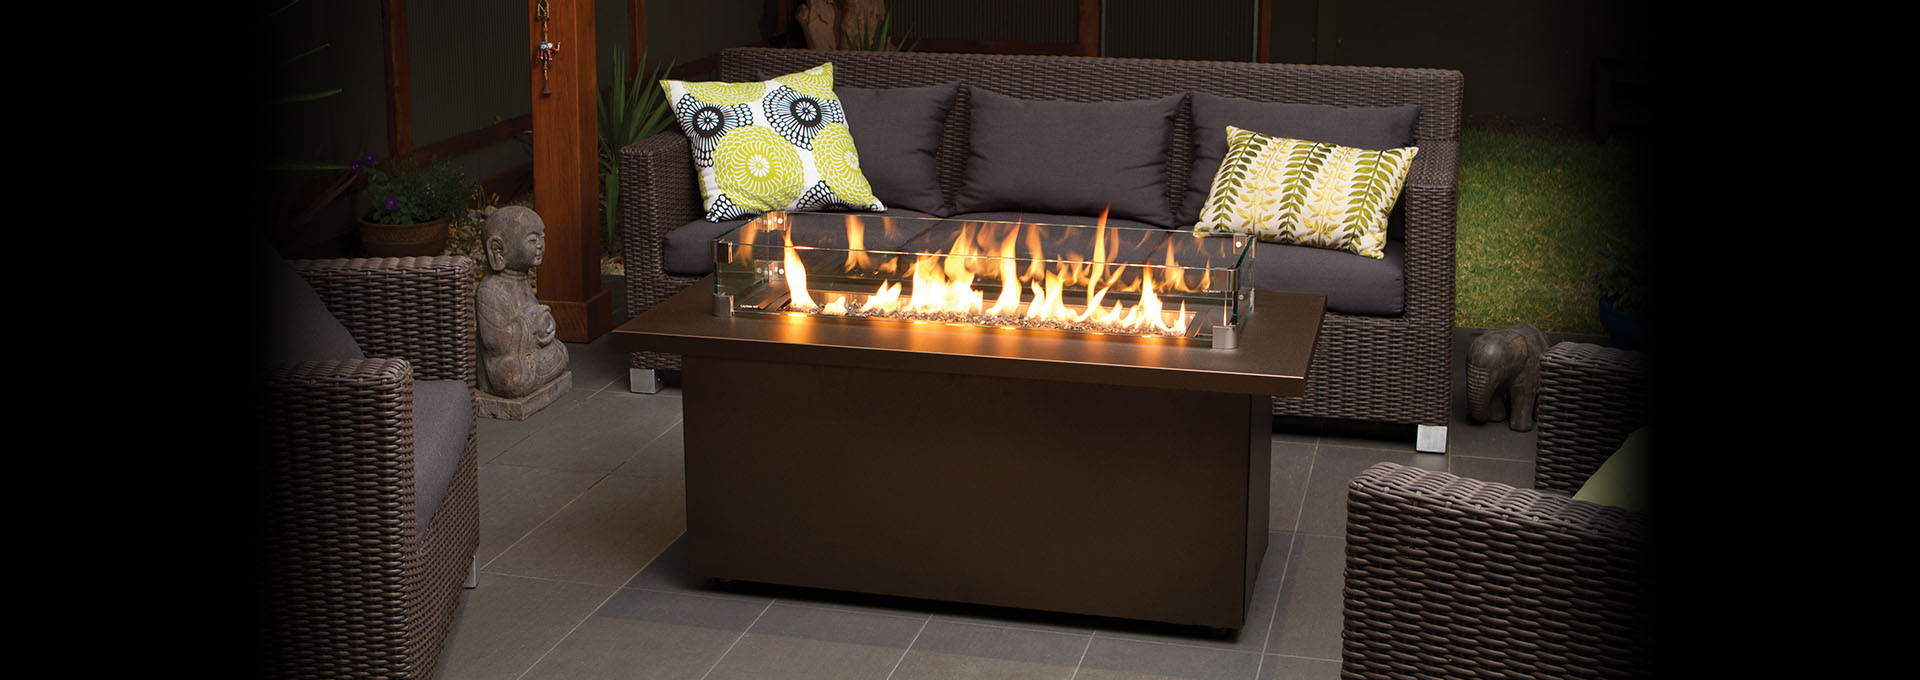 Regency Fireplace Remote Unique Outdoor Gas Fireplace Table Table Design Ideas